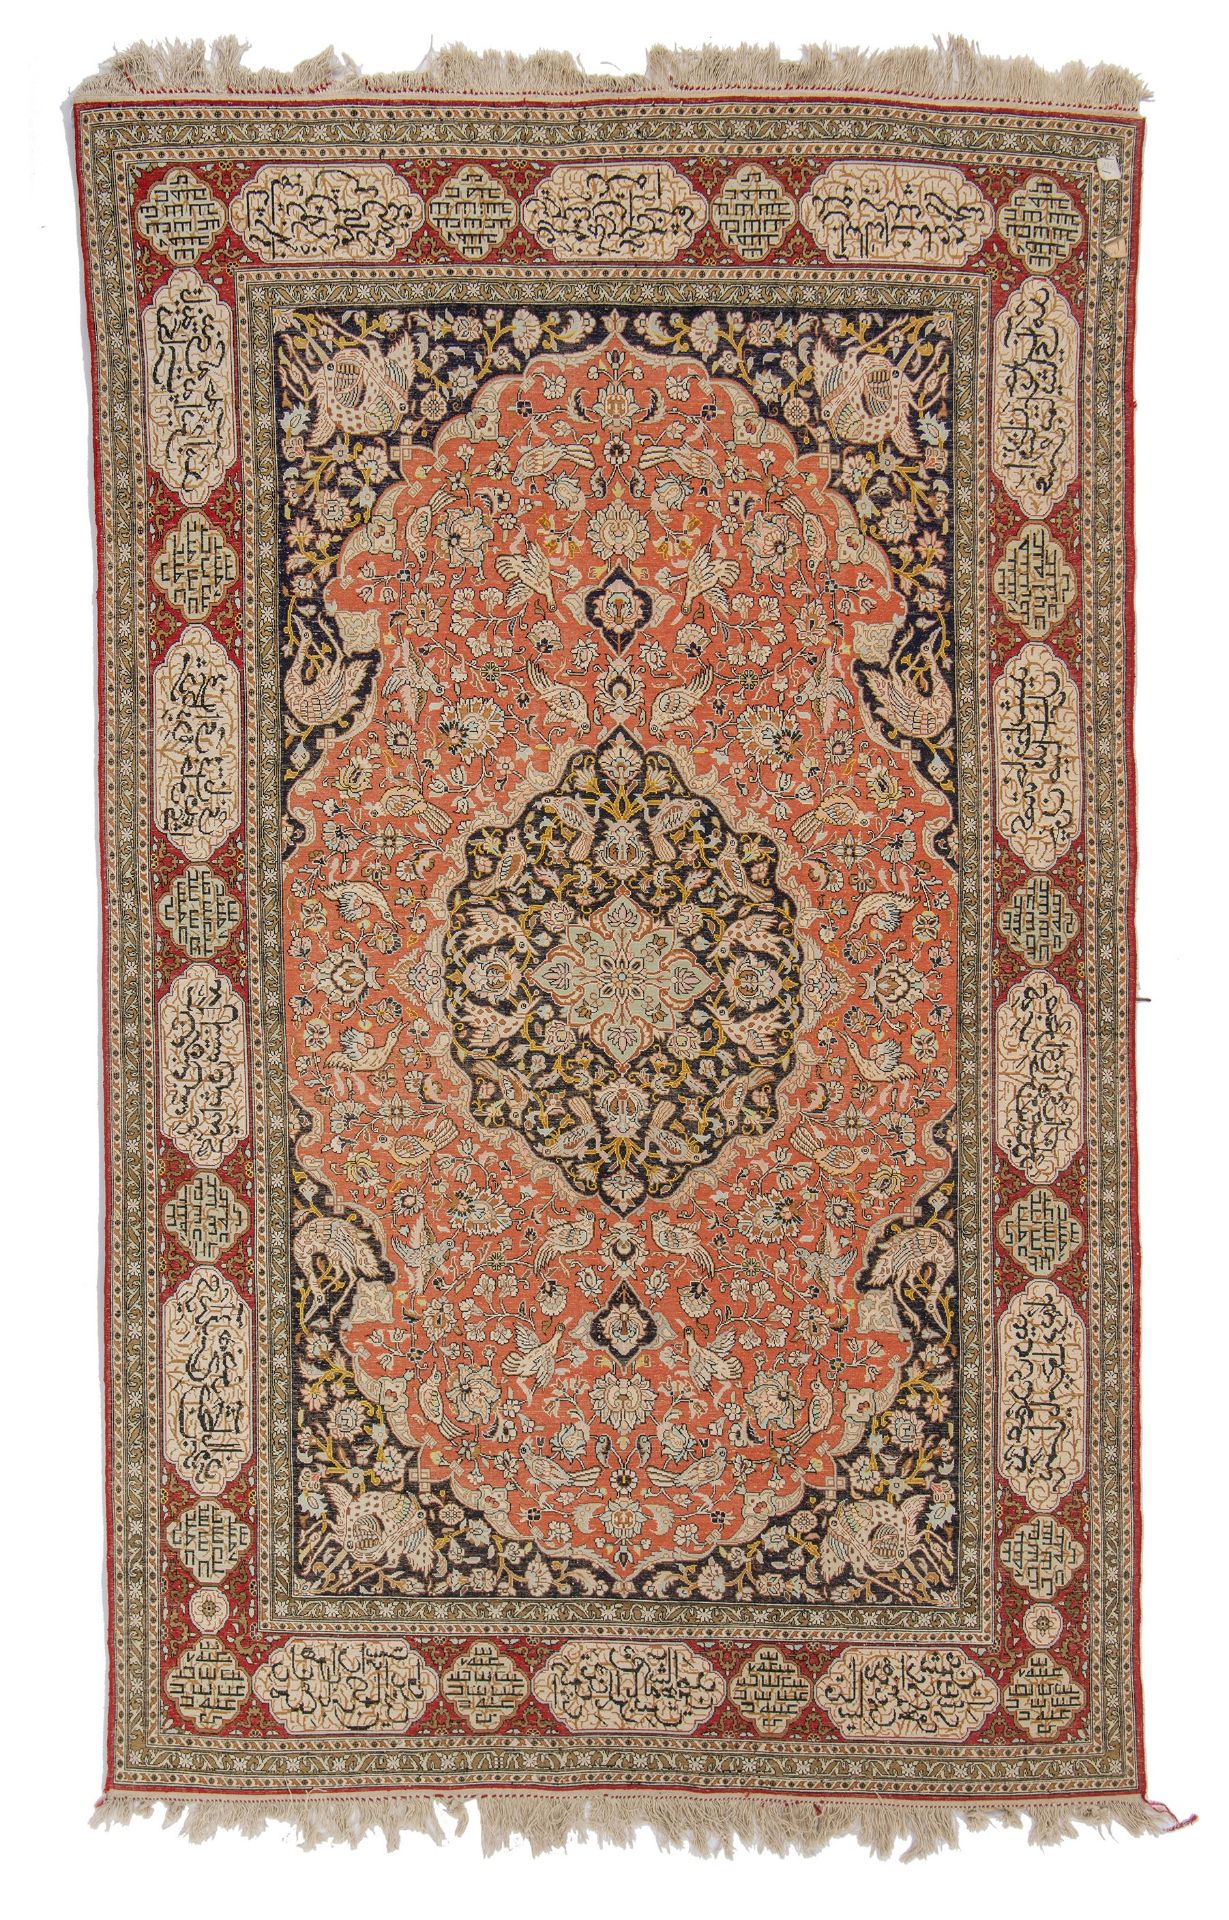 An Iran Ghoum carpet, floral decorated with birds, the borders with texts, silk, 137 x 216 cm - Image 2 of 6